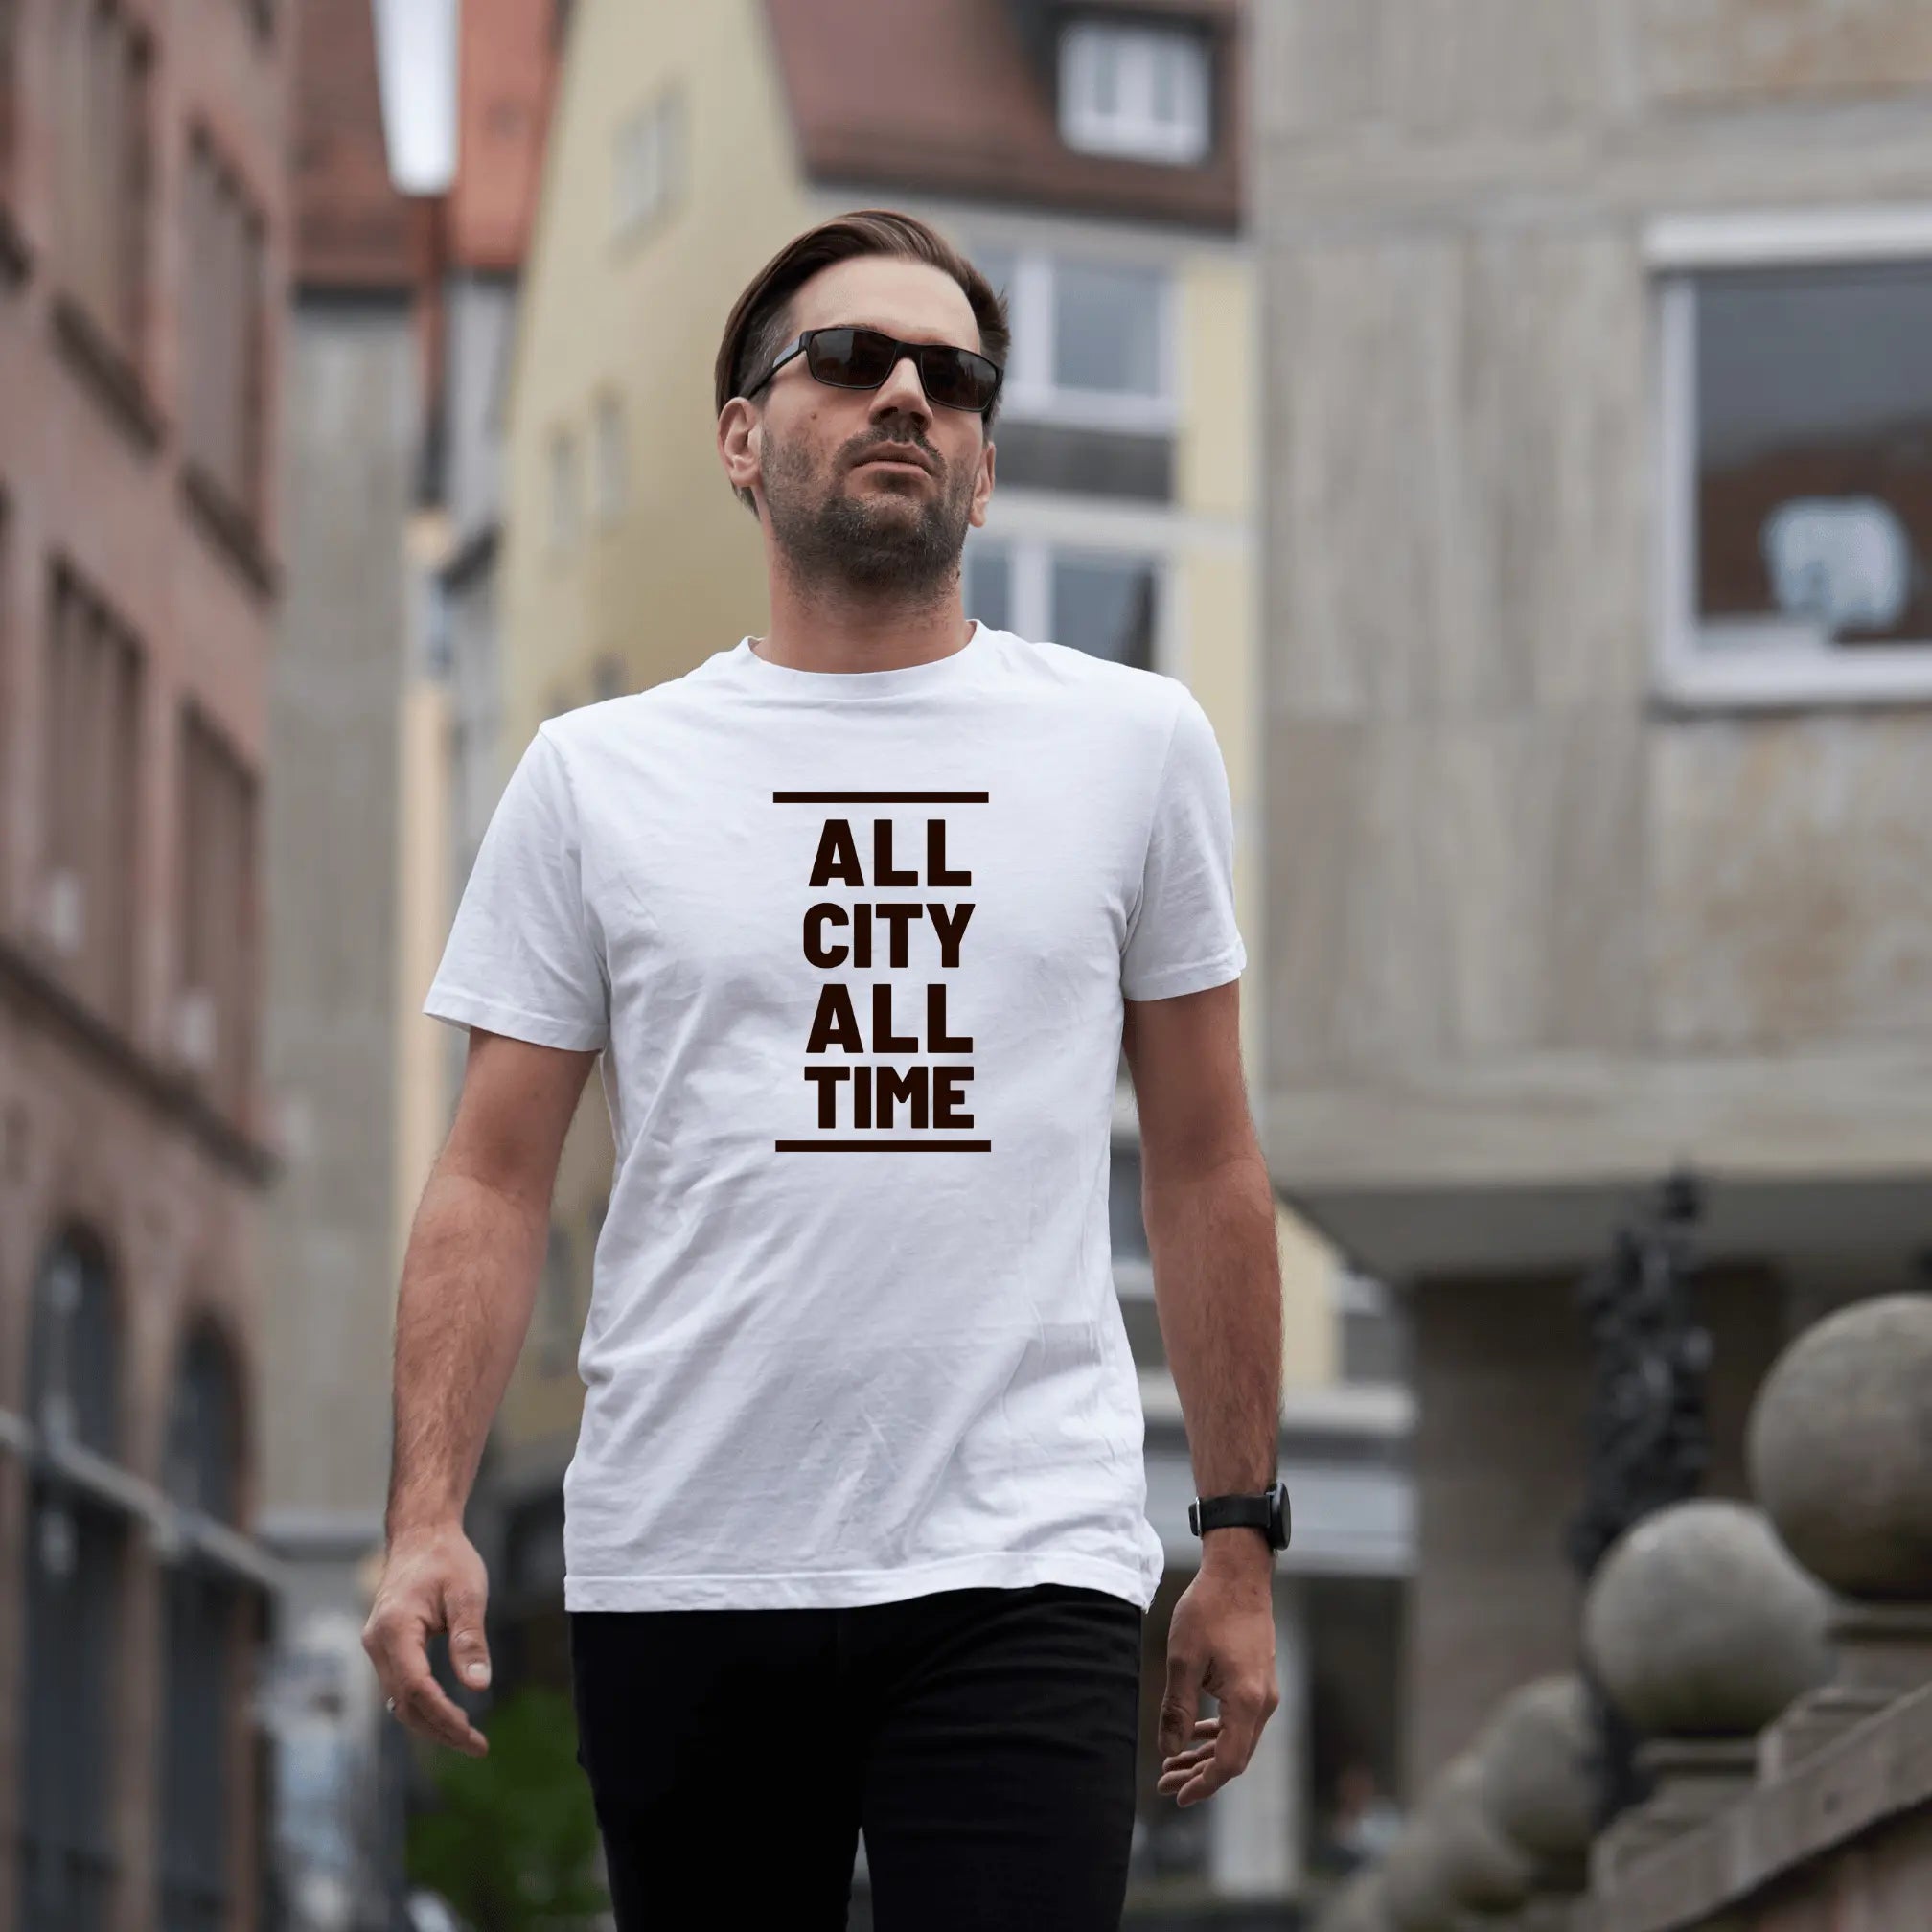 All City All Time Urban Anthropology